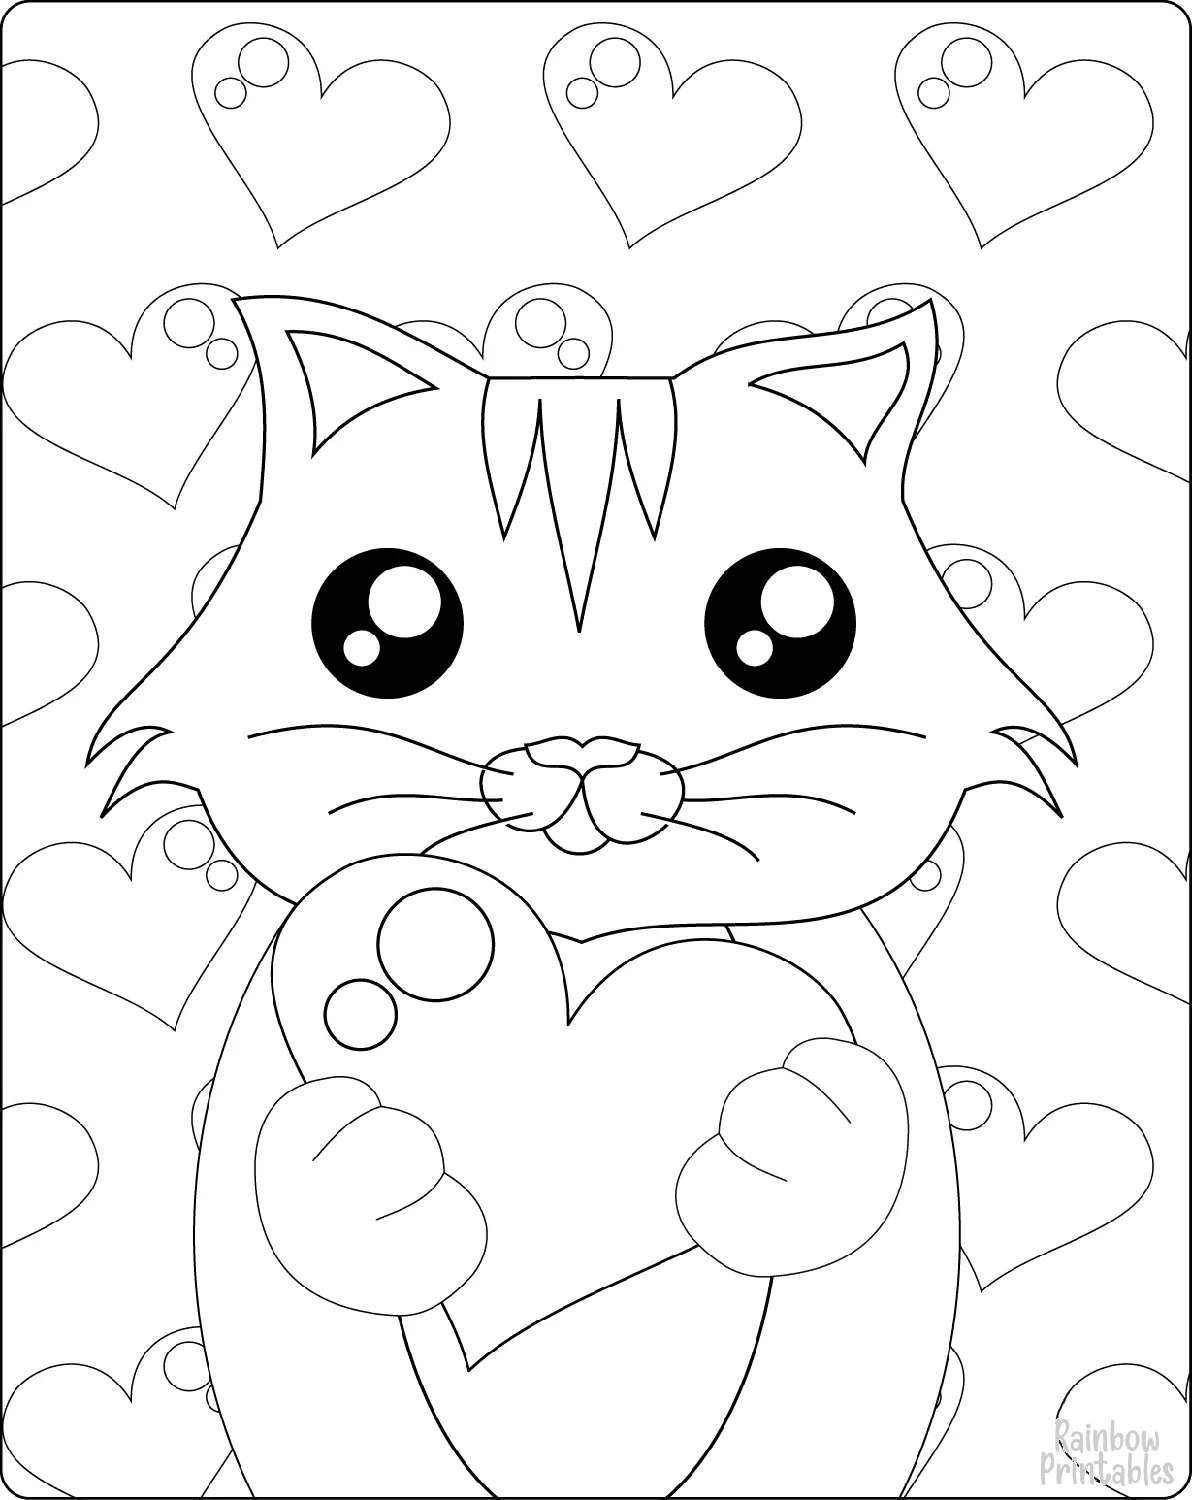 Valentine DAY KITTY CAT HOLDING HEART SHAPE Clipart Coloring Pages for Kids Adults Art Activities Line Art-15